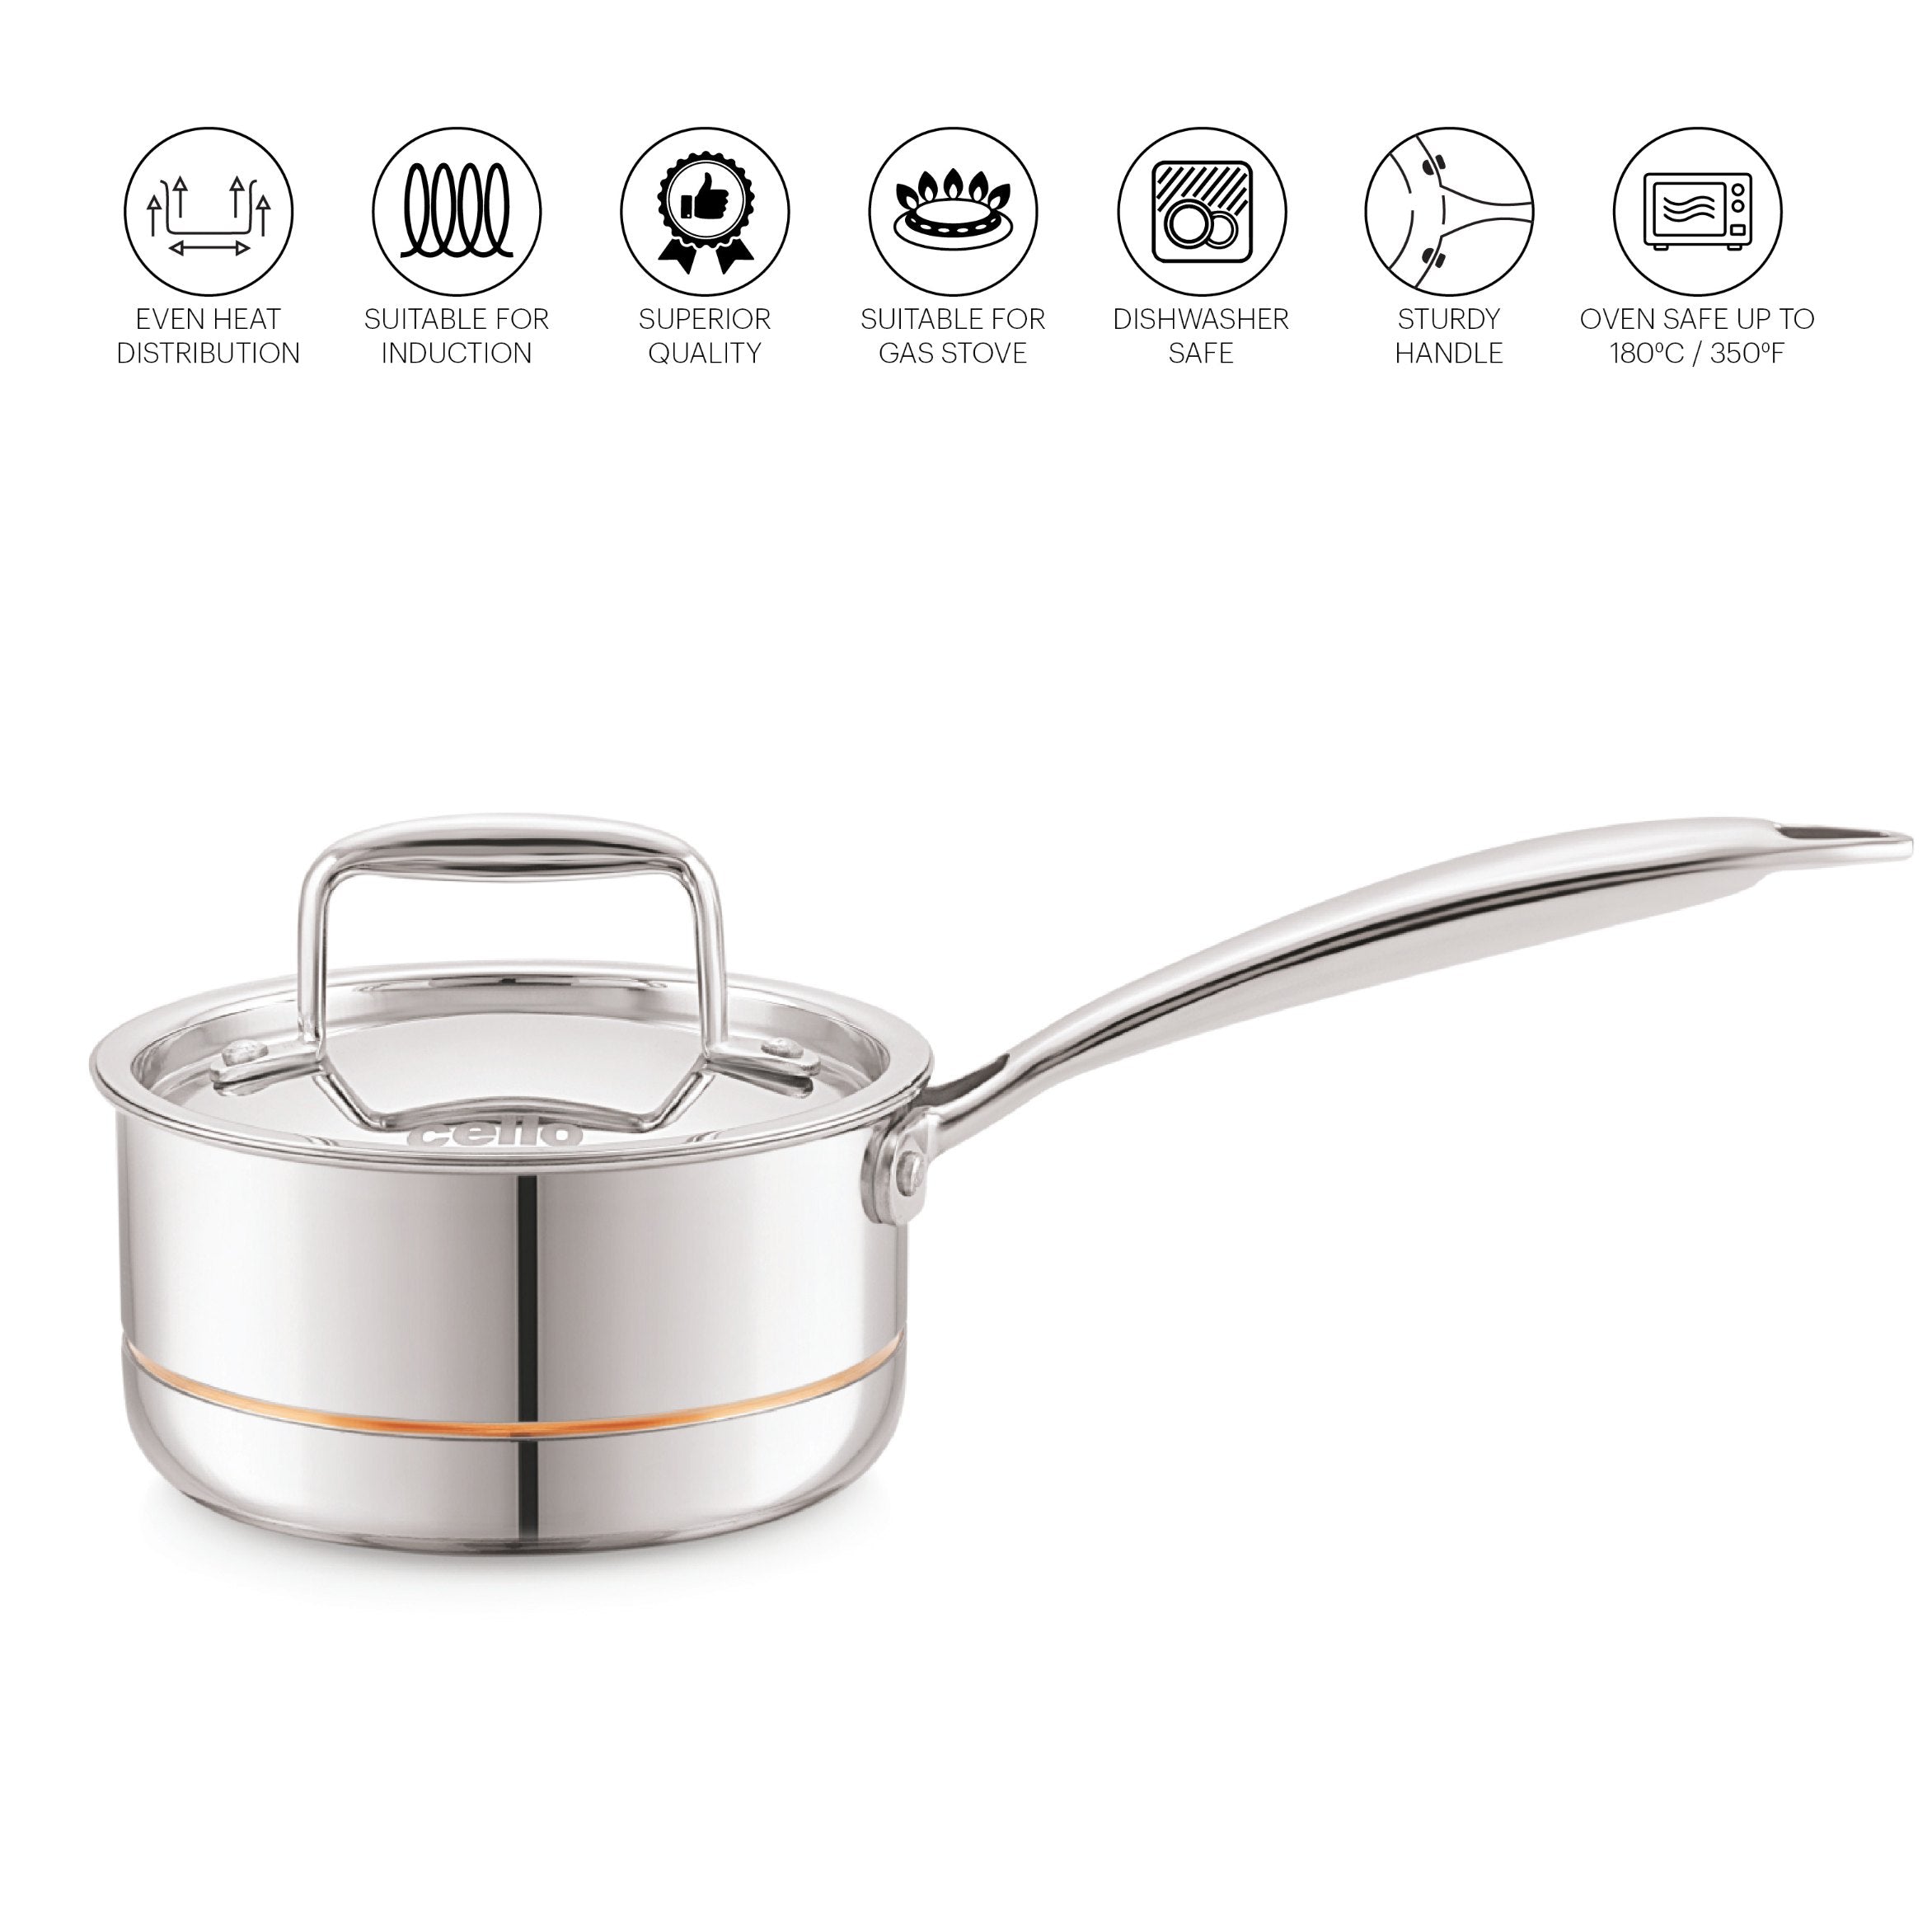 5-Ply Stainless Steel Sauce Pan with Lid Silver / 2.2 Litres